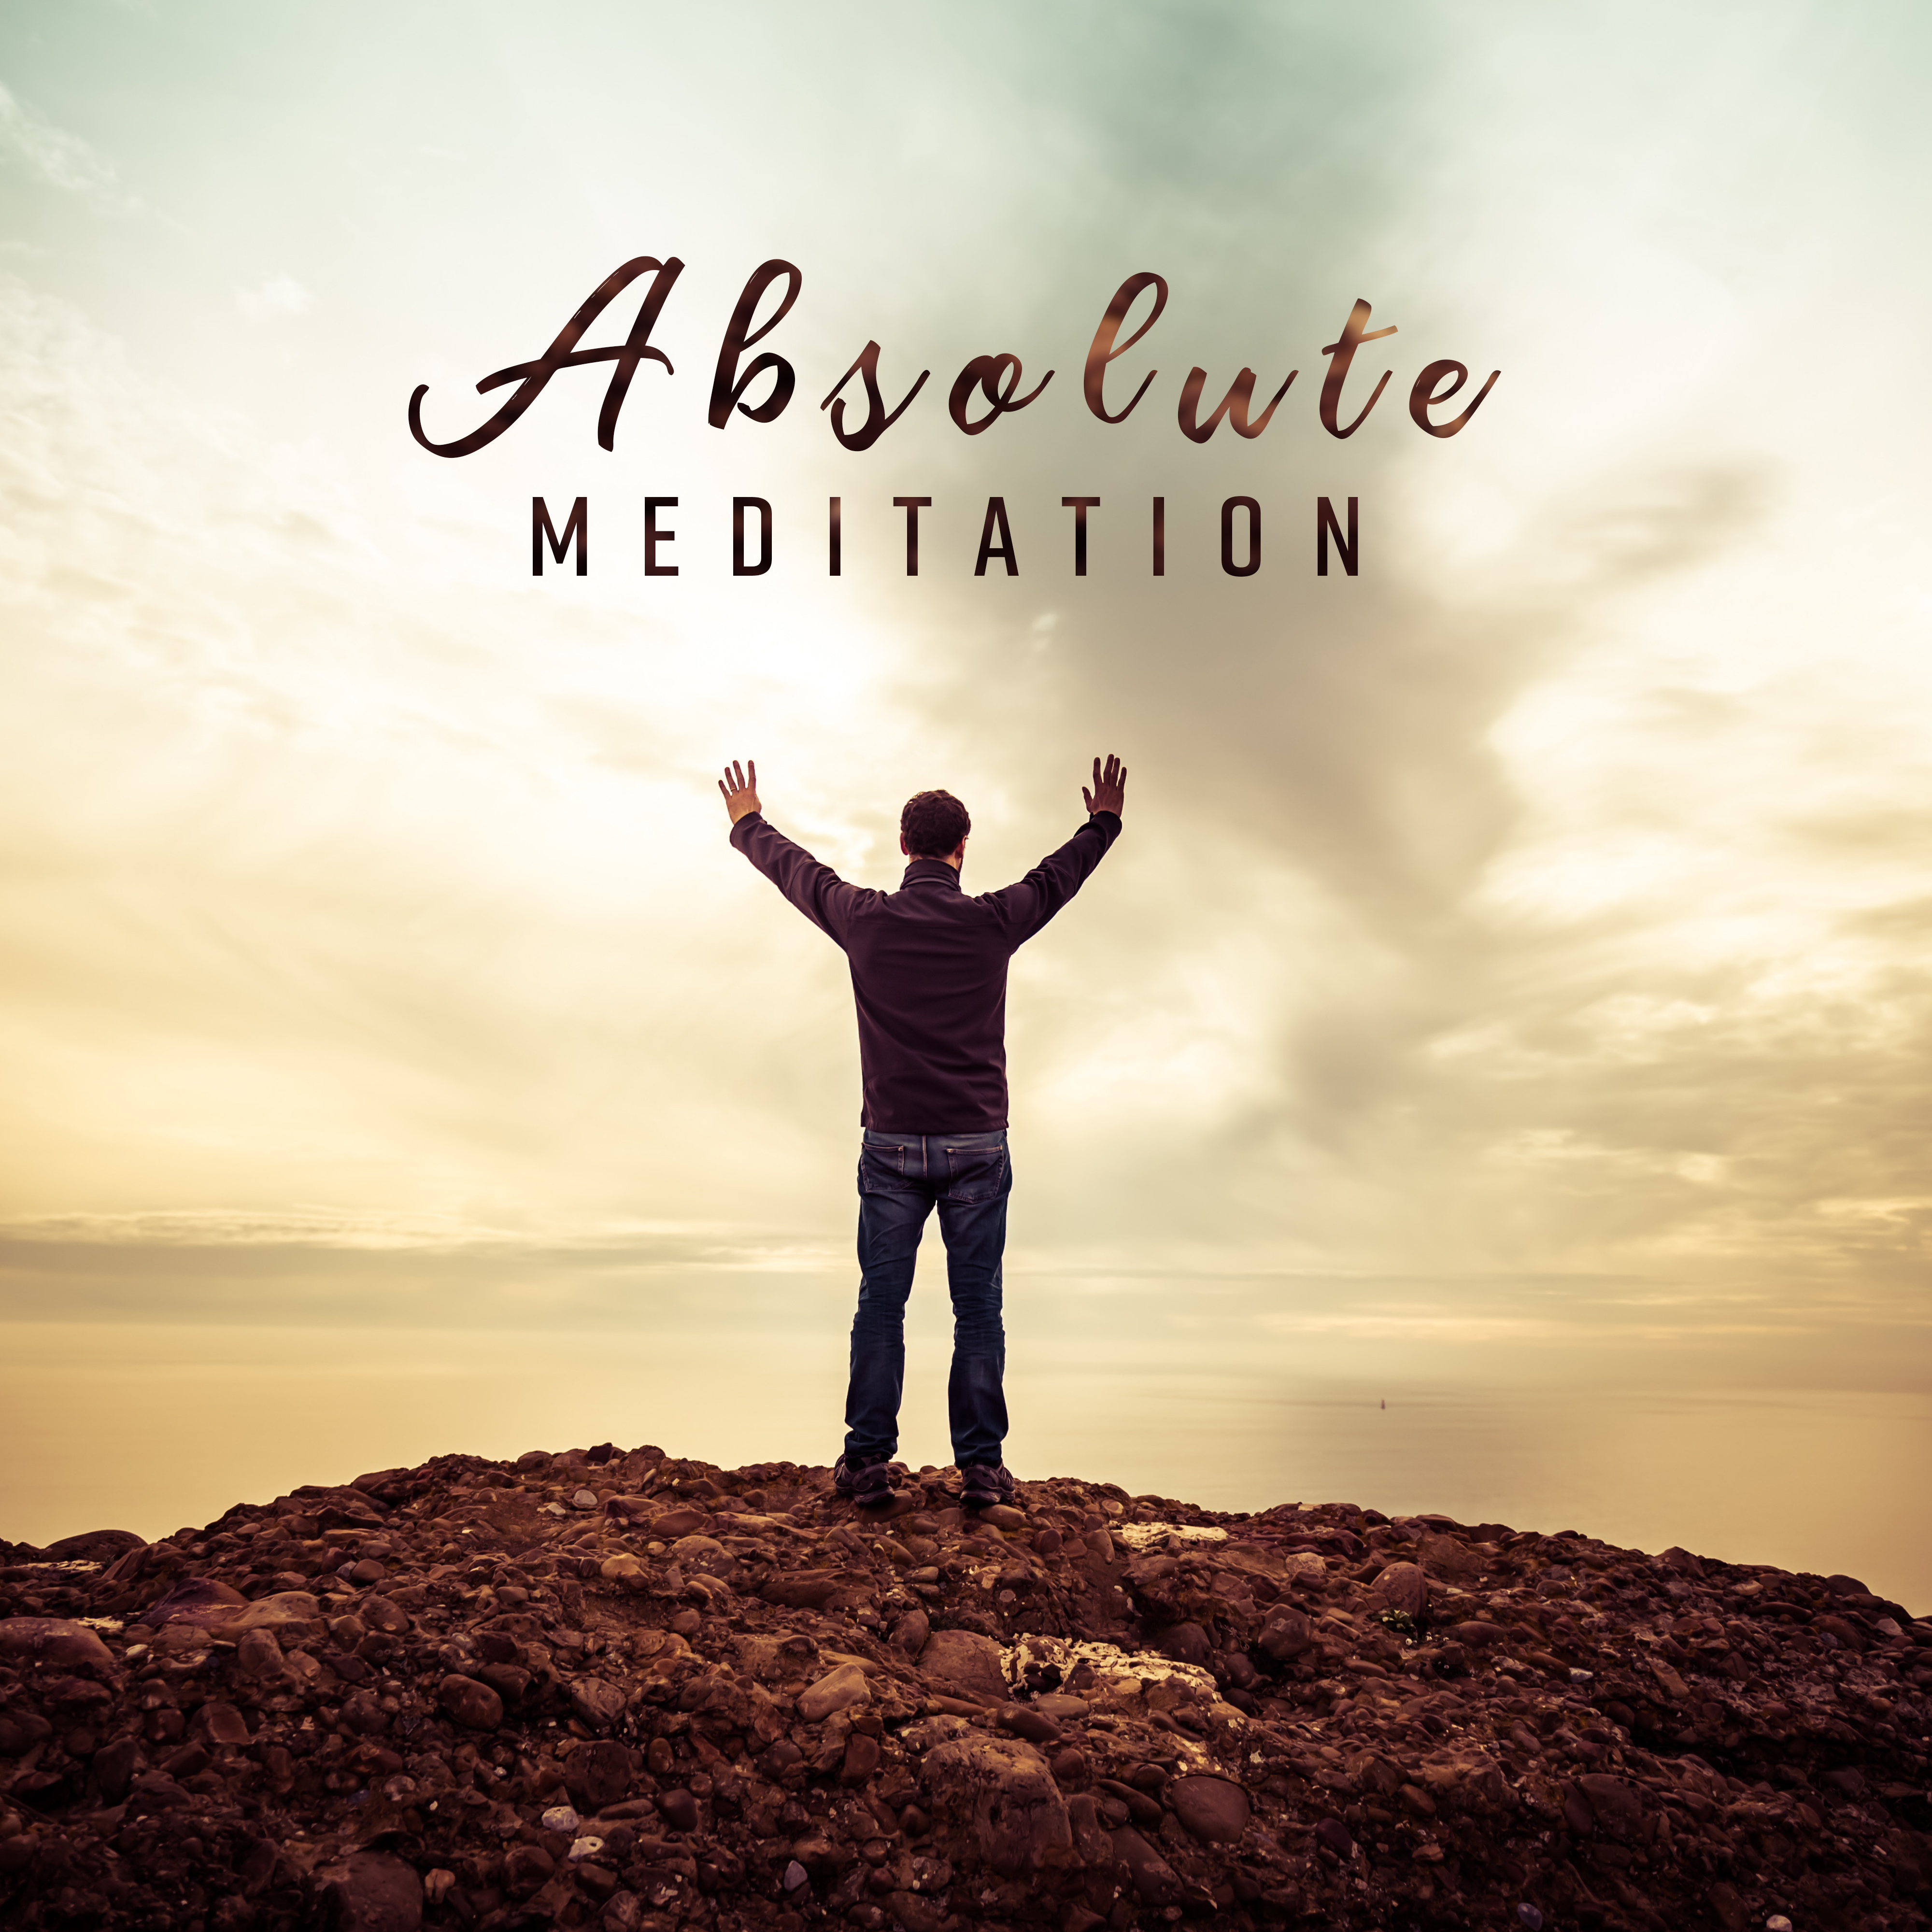 Absolute Mediation: Mindful and Knowledge of the Absolute True Self